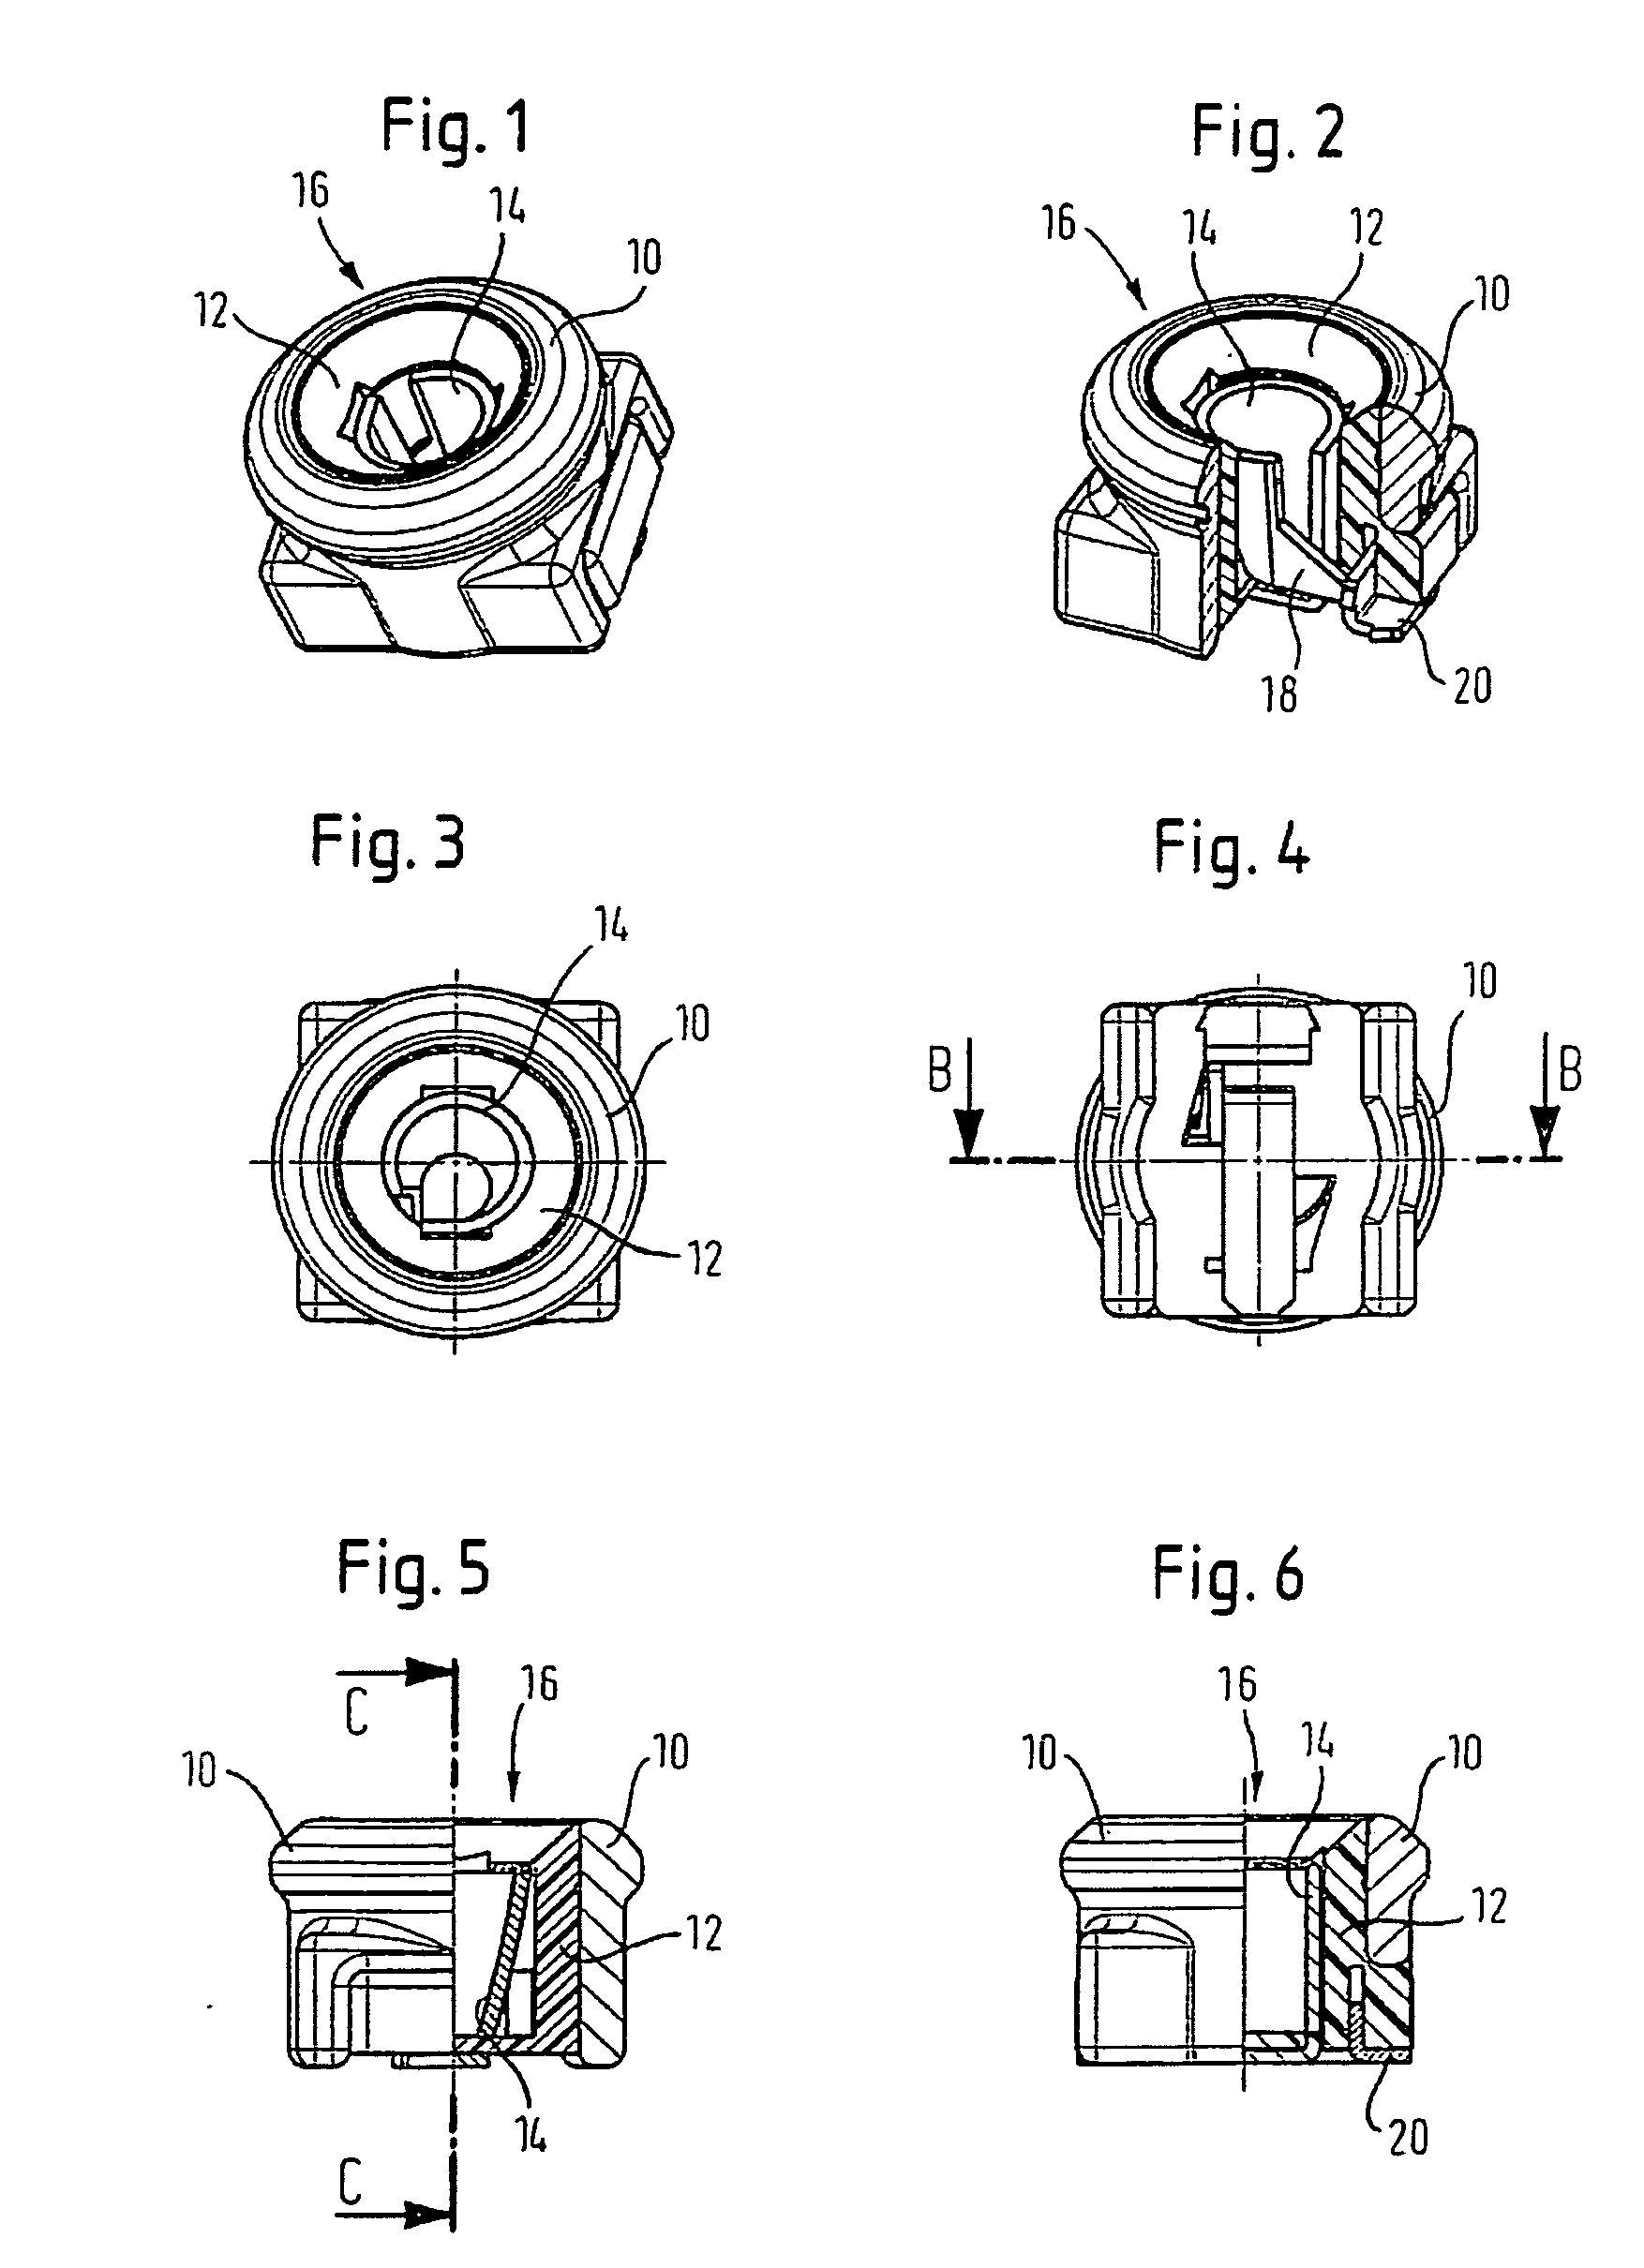 Coaxial plug-in connector comprising a contact mechanism for electrical contact